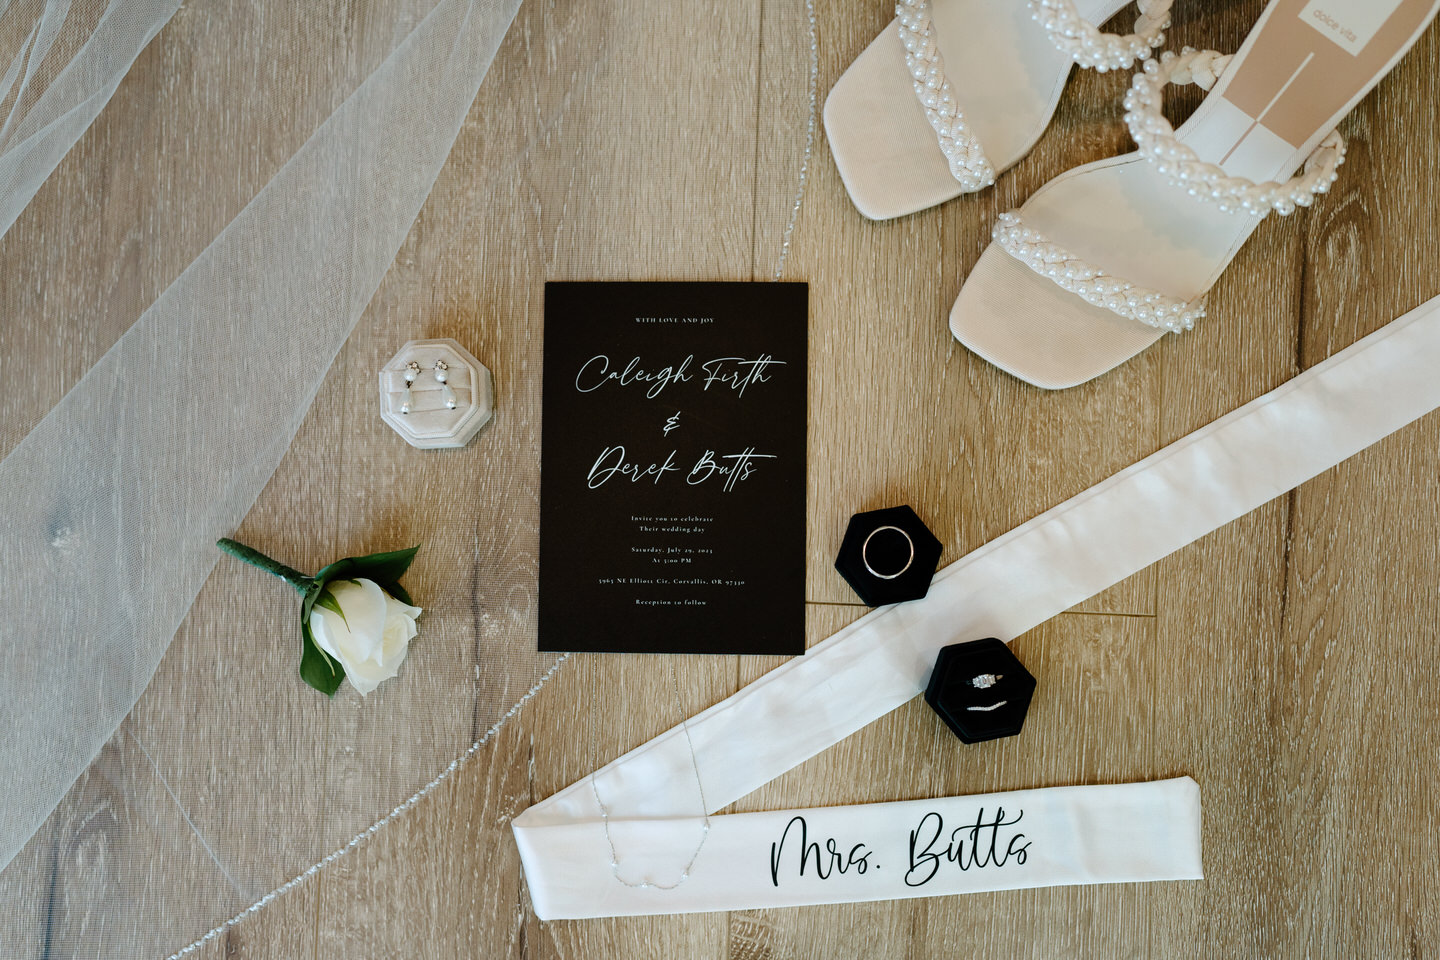 wedding day details of veil, invitation, and rings